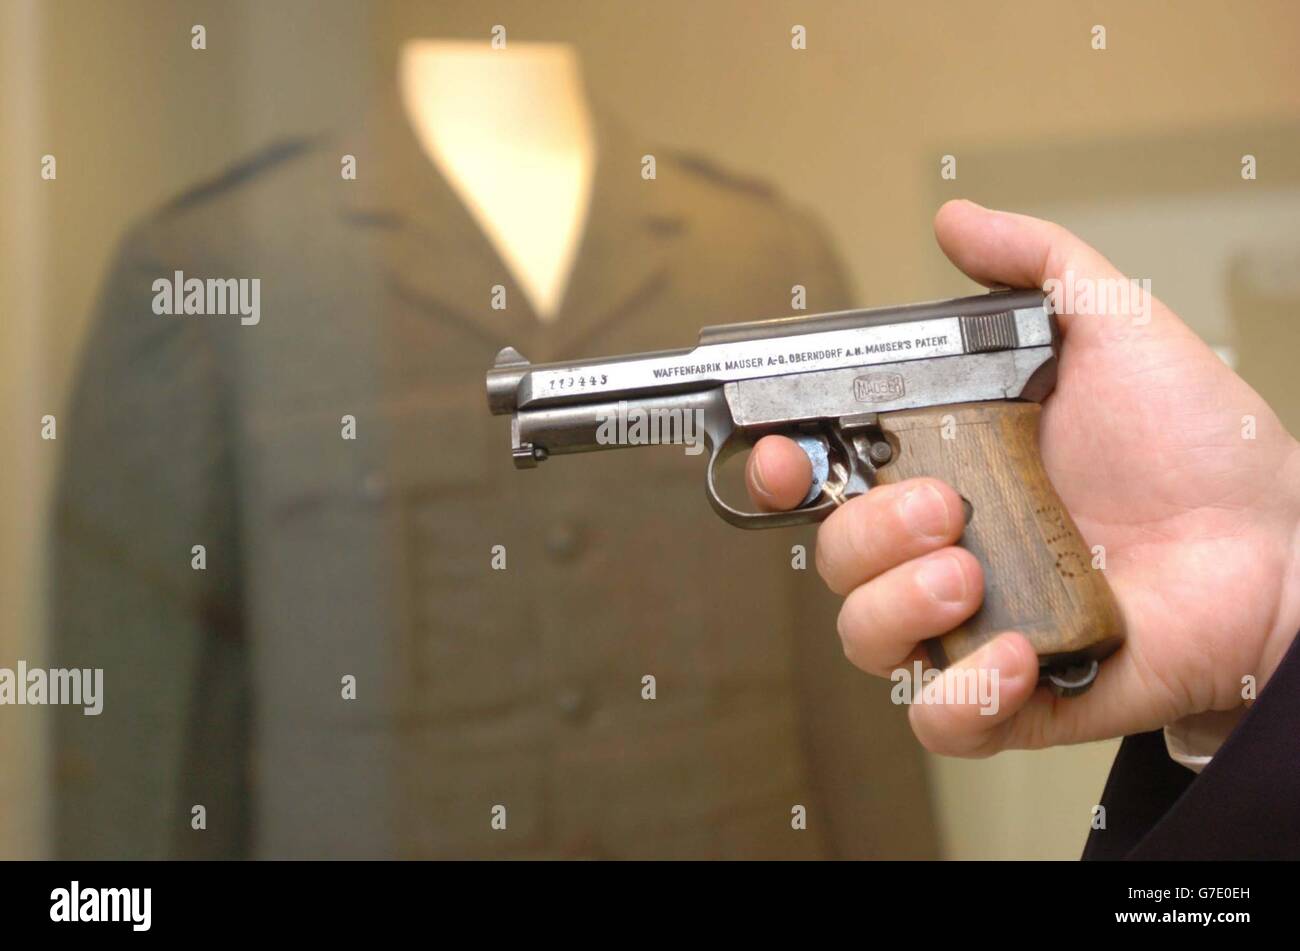 A Mauser model 1911 automatic pistol, which belonged to Irish political figure, Michael Collins is displayed by Dr Pat Wallace, Director of the National Museum of Ireland, at Collins Barracks, Dublin, Ireland. The initials 'MC' can be seen at the base of the wooden grip and it will form part of a new Michael Collins memorabilia exhibit that also includes a sword, a uniform and the pen allegedly used to sign the Anglo/Irish Treaty. Stock Photo